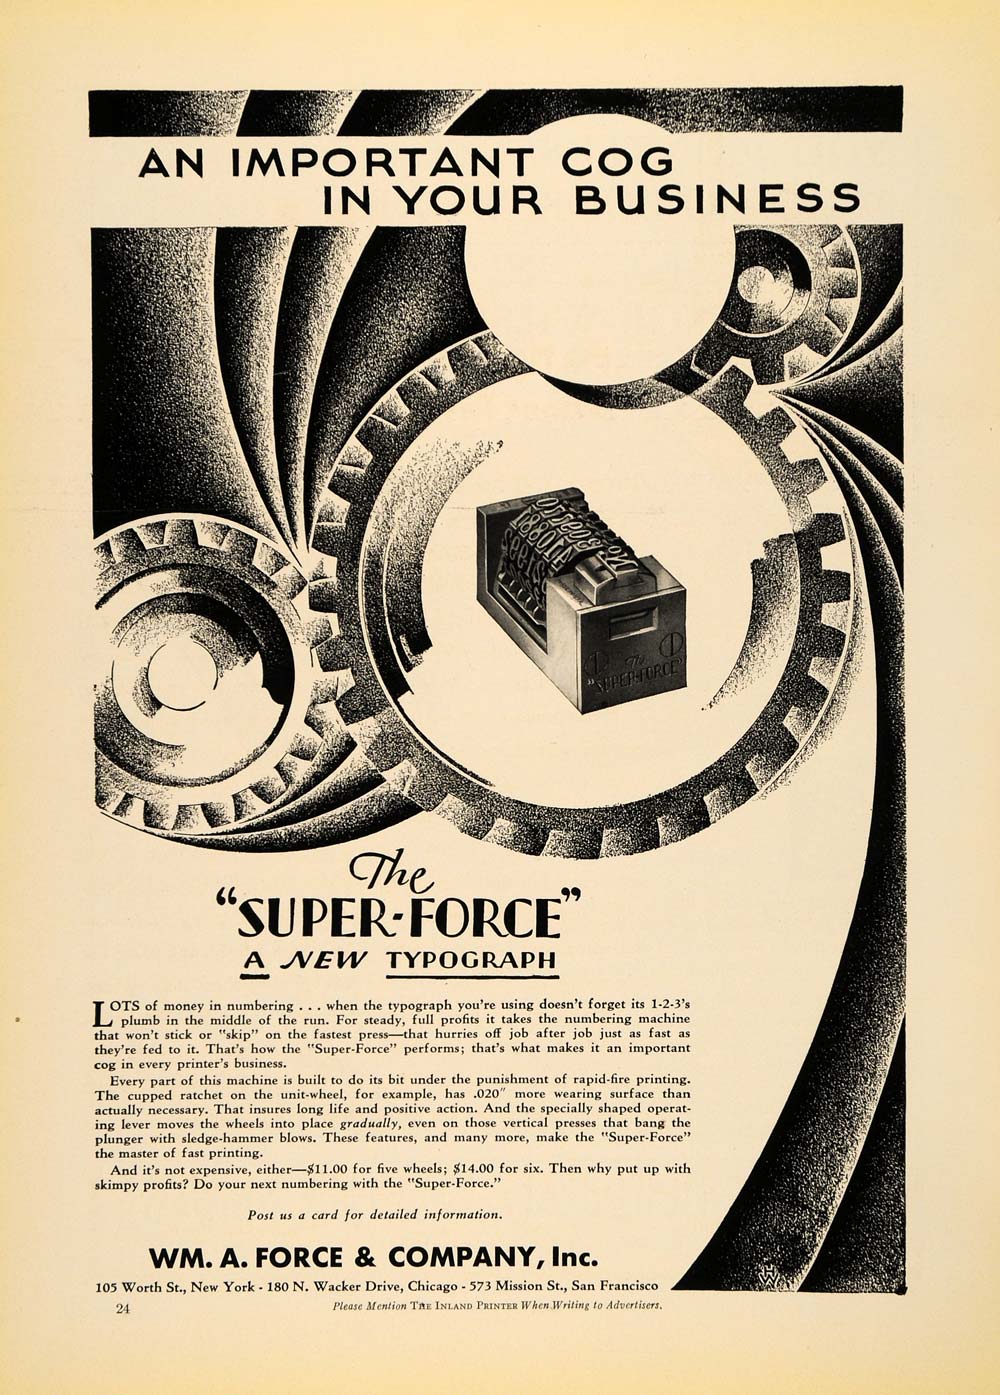 1930 Ad WM A Force & Co. Super-Force Typograph - ORIGINAL ADVERTISING IPR1